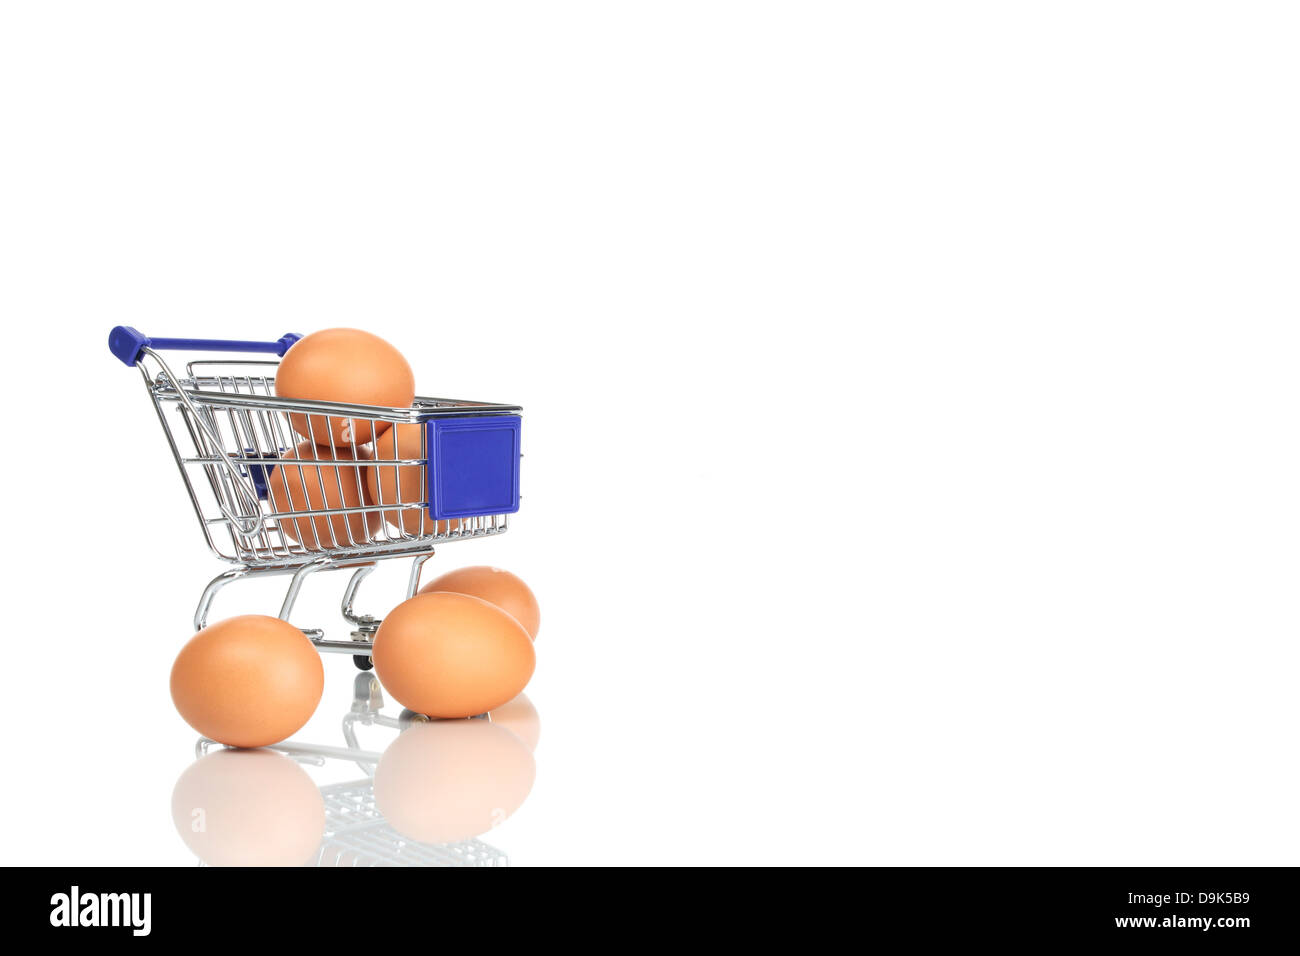 Shopping carts and eggs Stock Photo